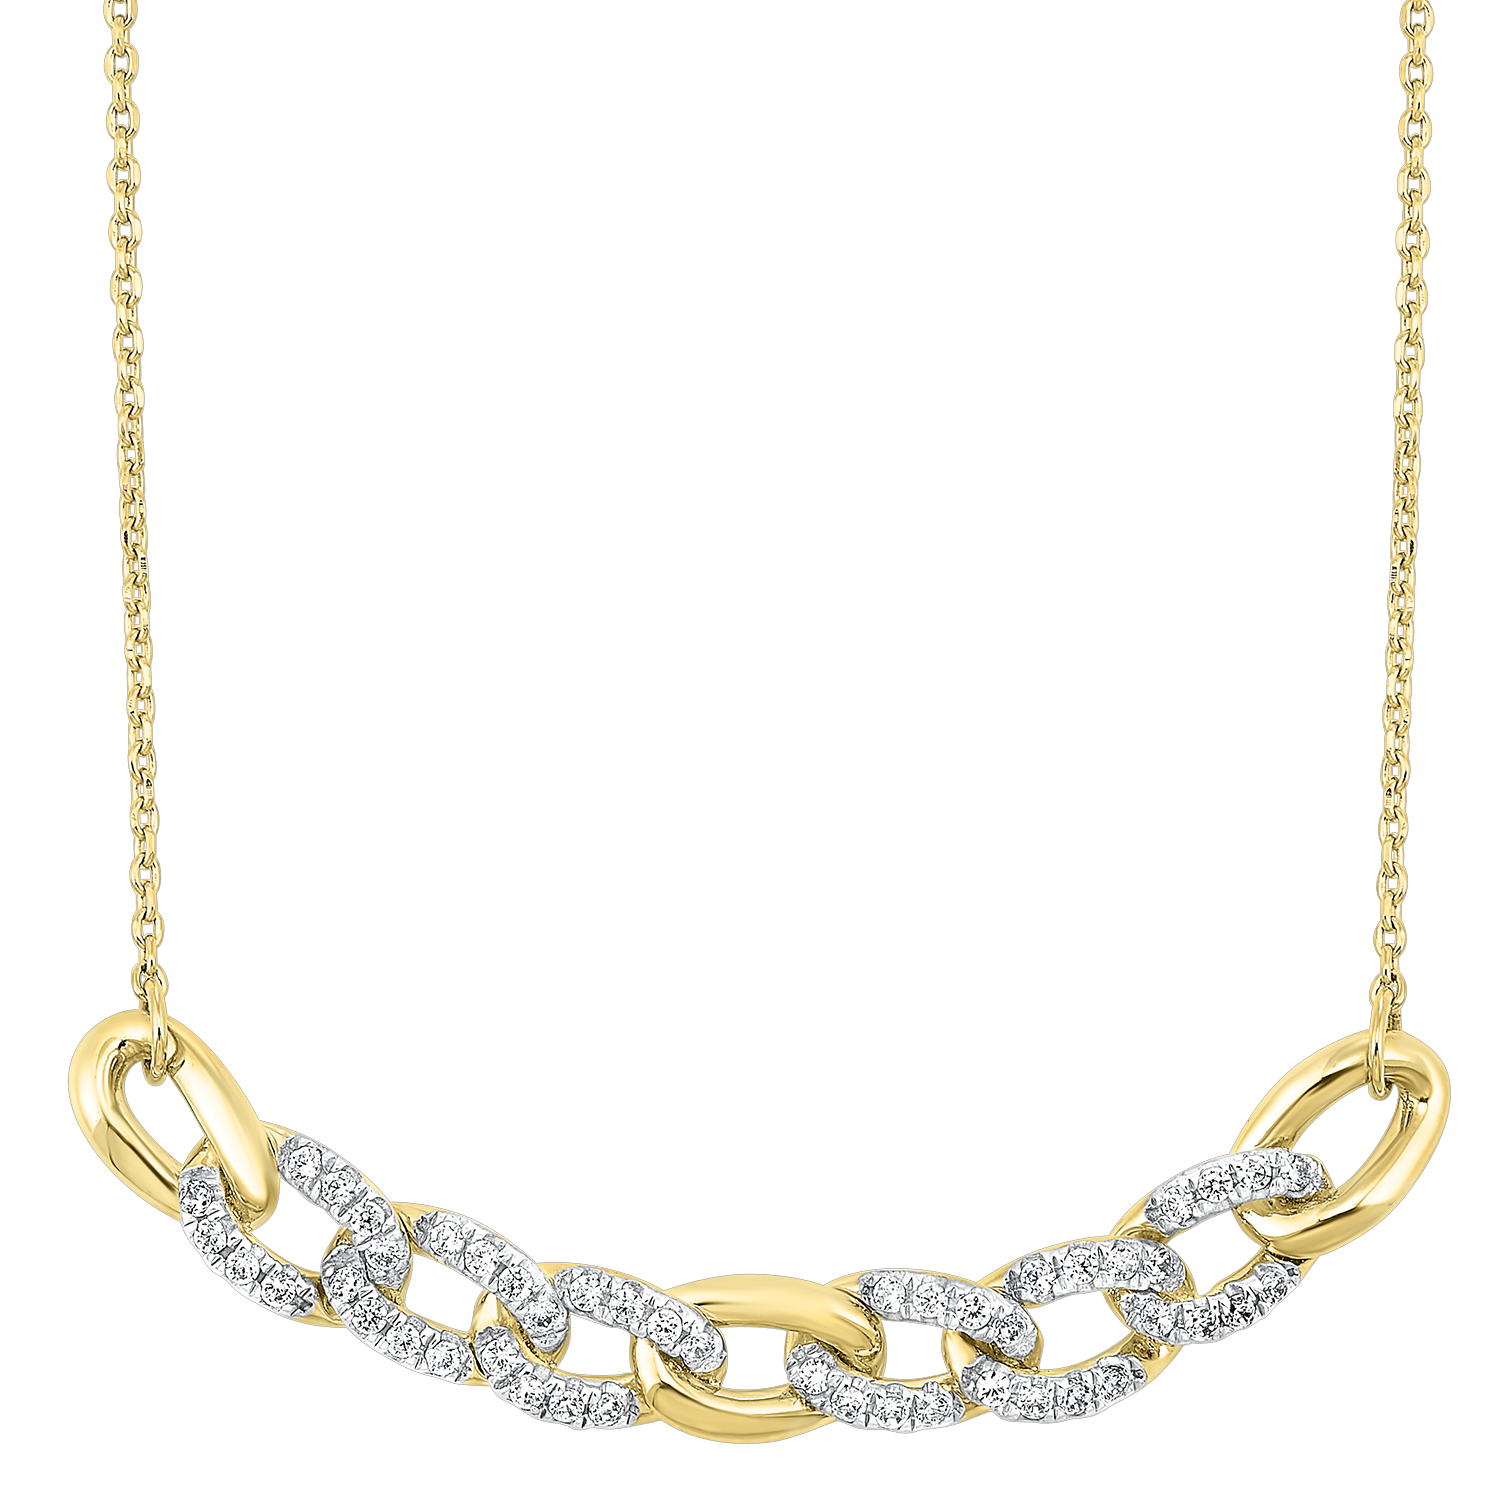 BW James Jewelers Necklace 16 Page Christmas Catalog Offer 14K Diamond Necklace 1/3 ctw